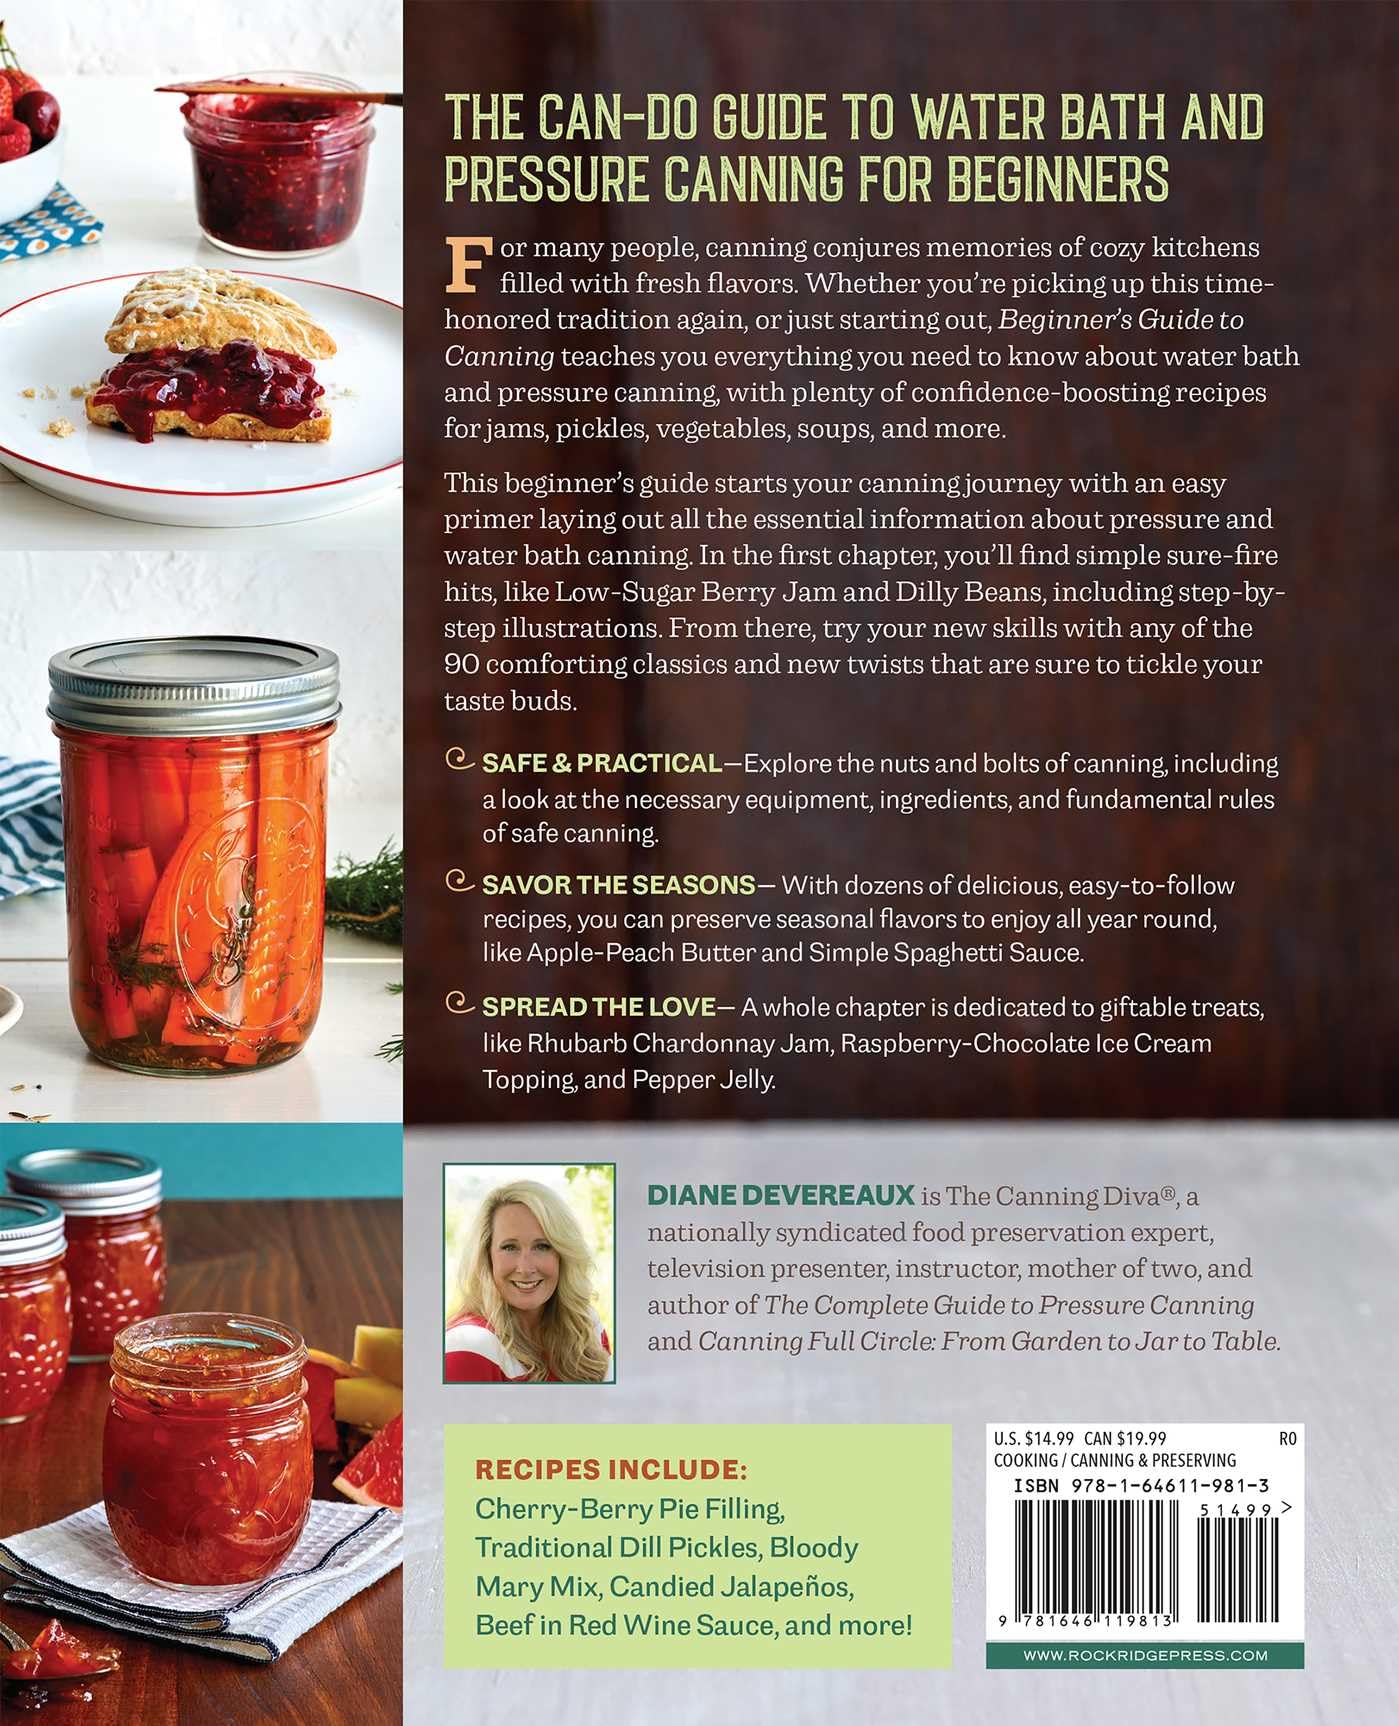 Beginner's Guide to Canning: 90 Easy Recipes to Can, Savor, and Gift